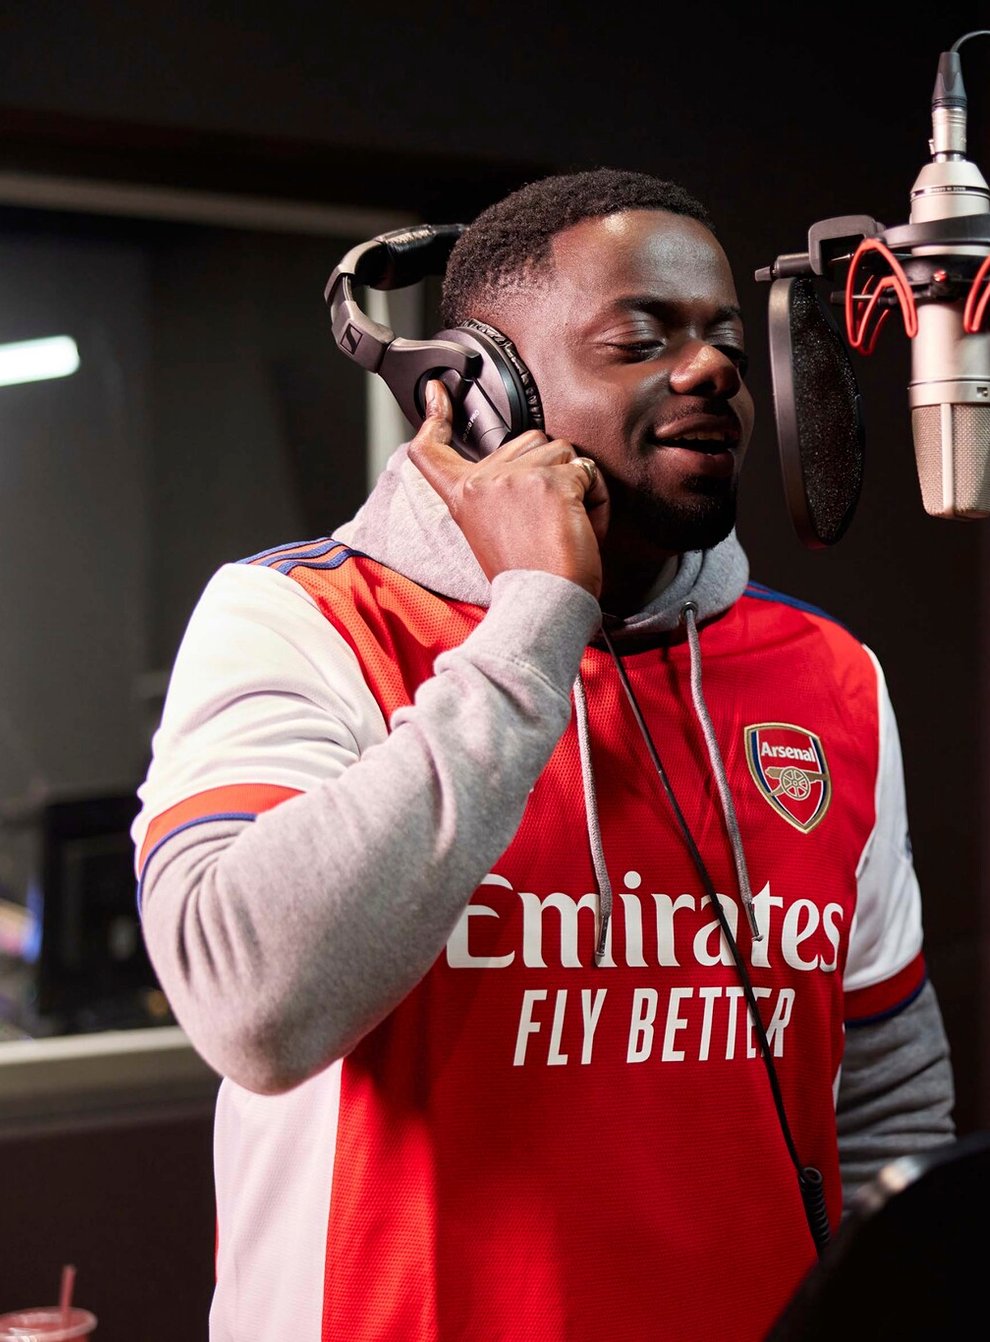 Hollywood star Daniel Kaluuya will narrate Amazon Prime Video’s All or Nothing series on Arsenal (Amazon Prime Video handout/PA)